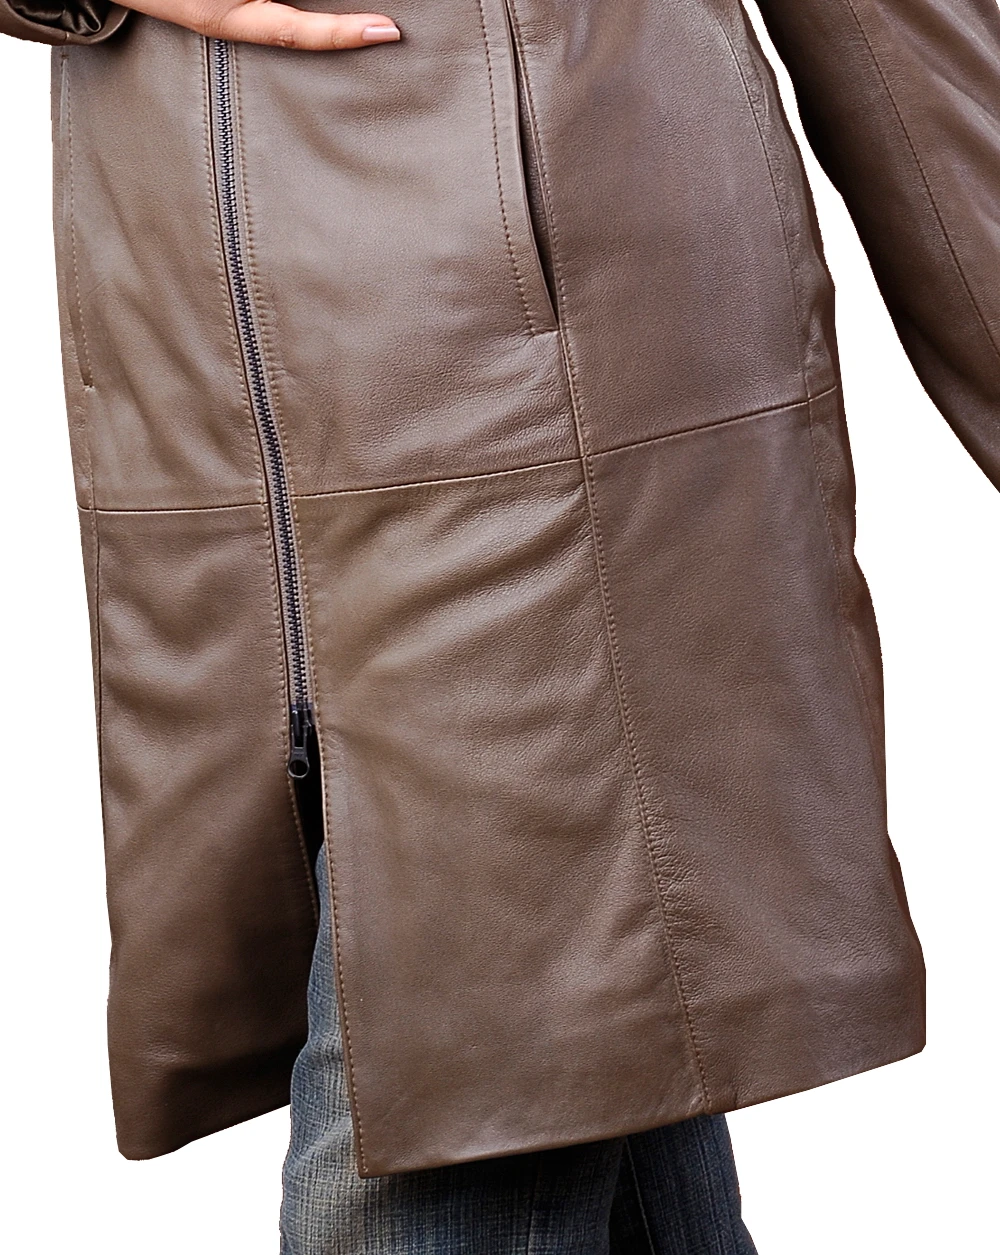 Womens long leather jacket